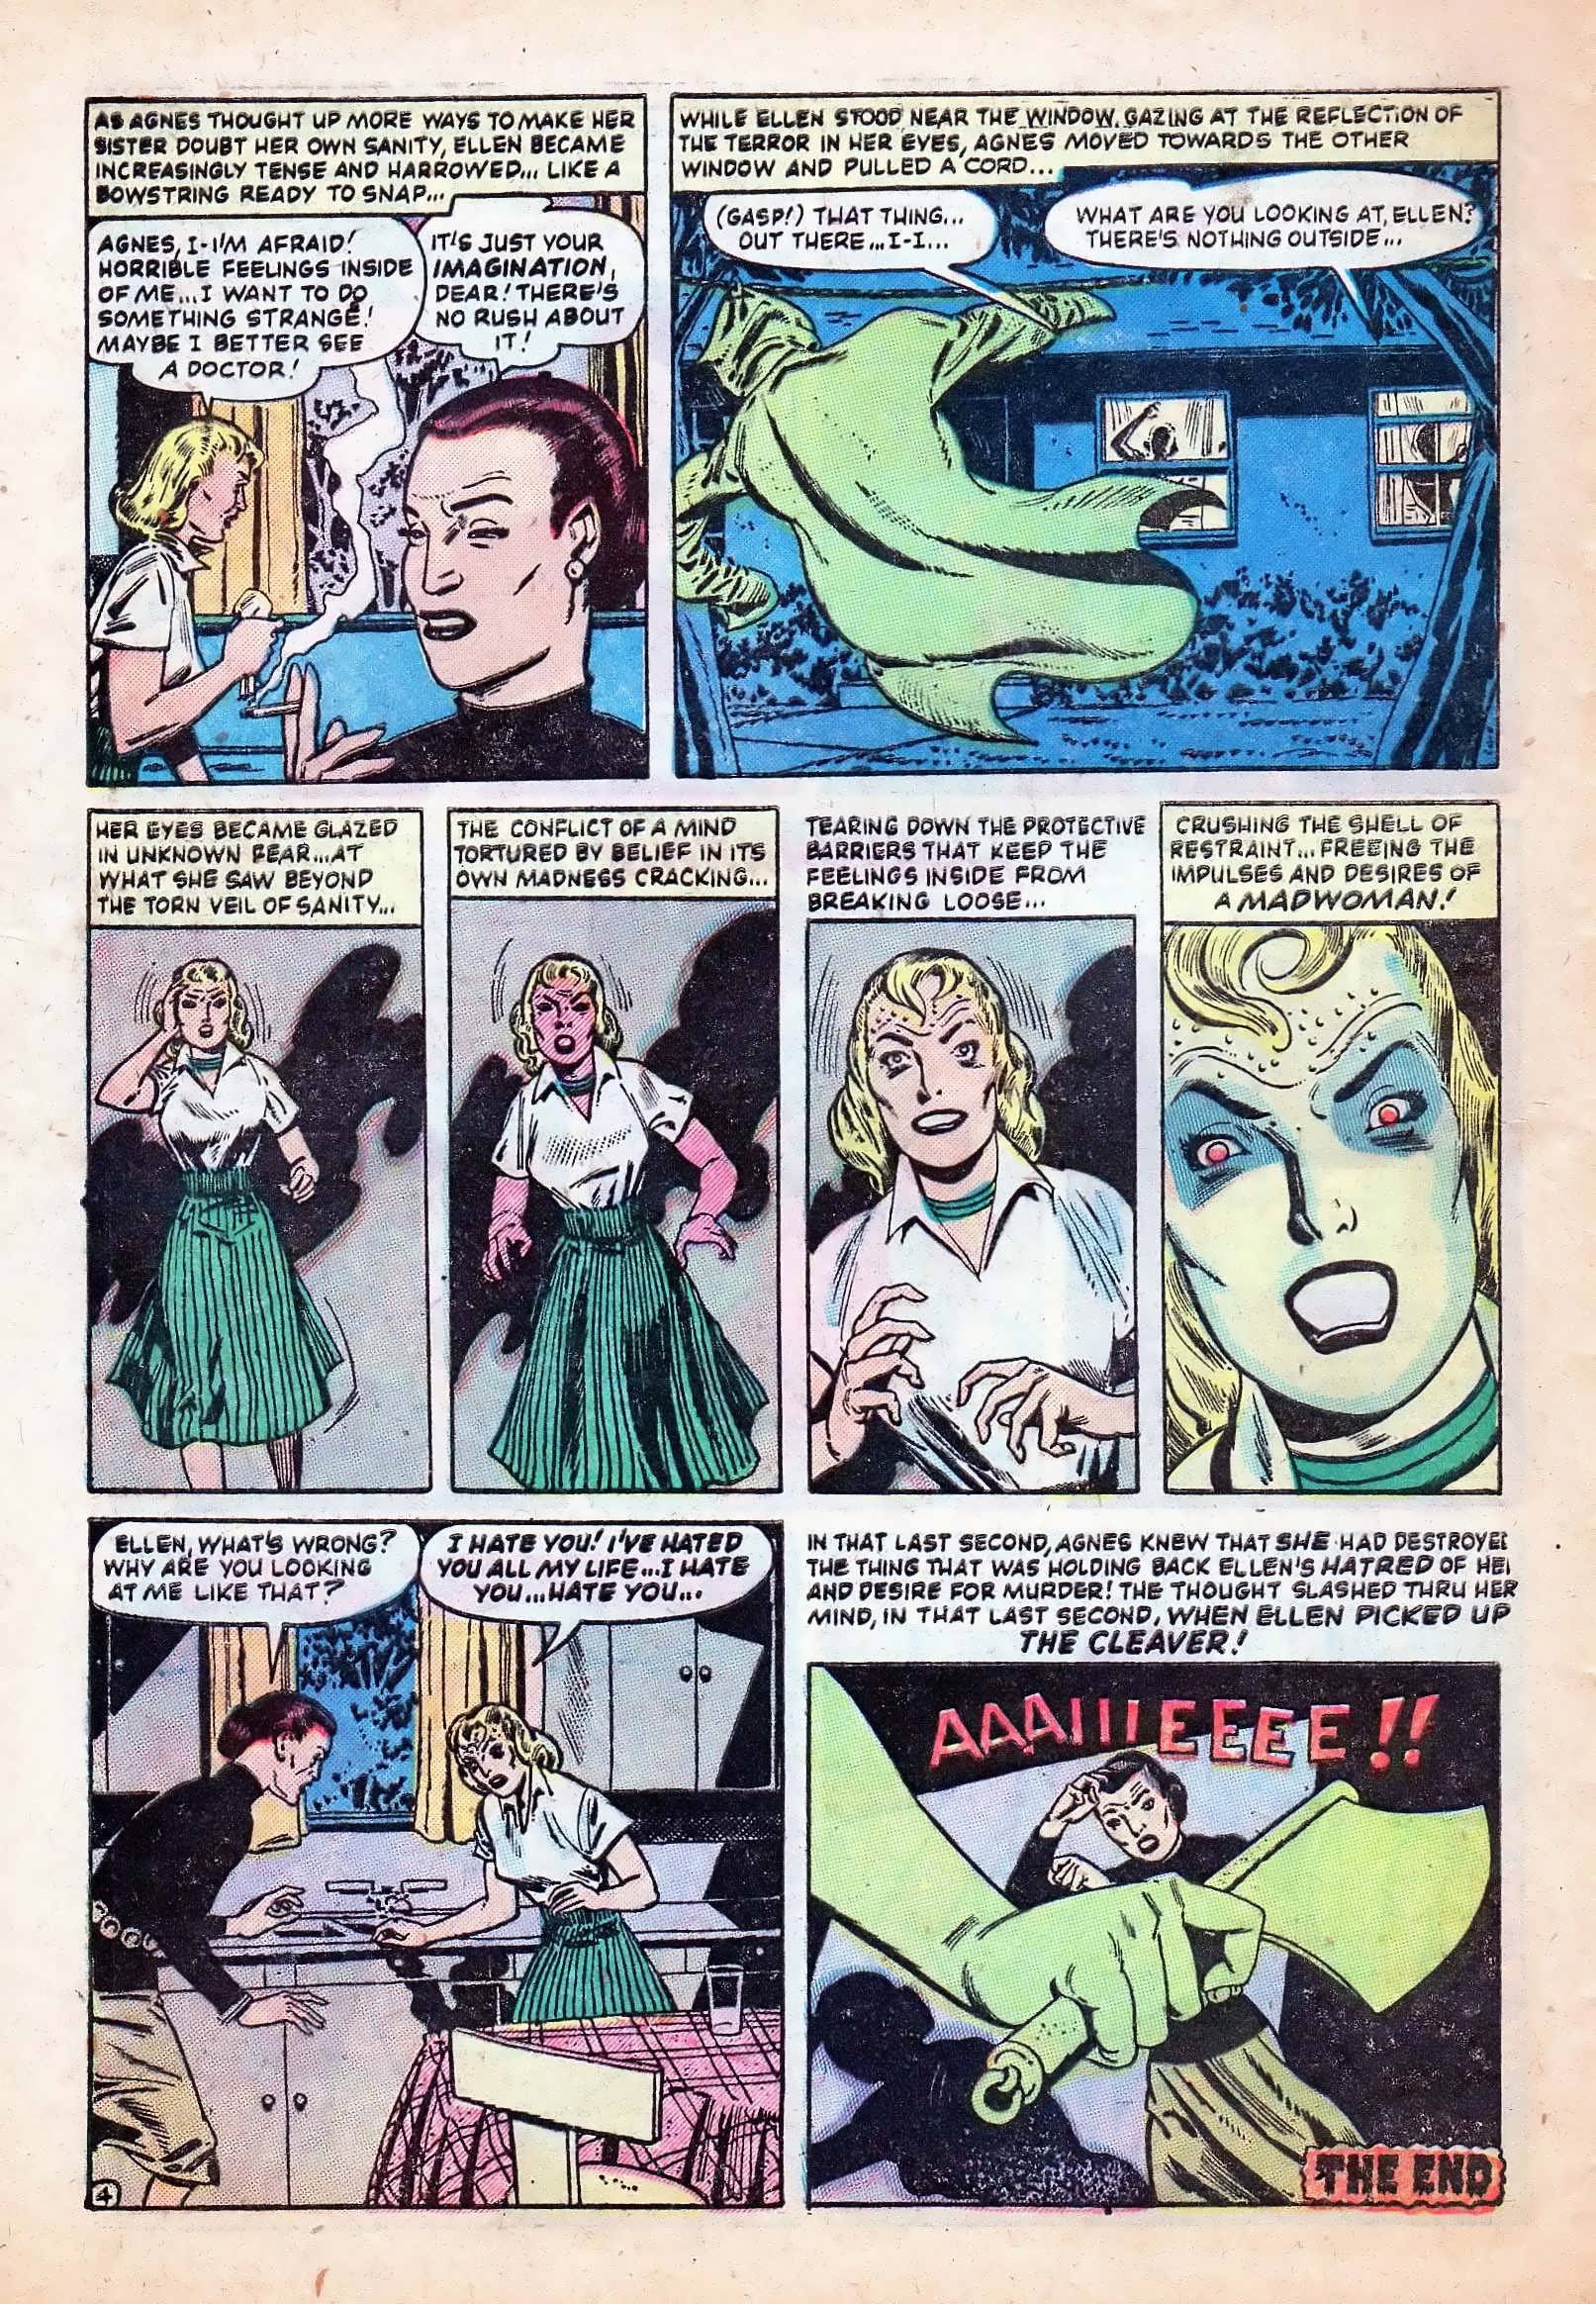 Marvel Tales (1949) 108 Page 31